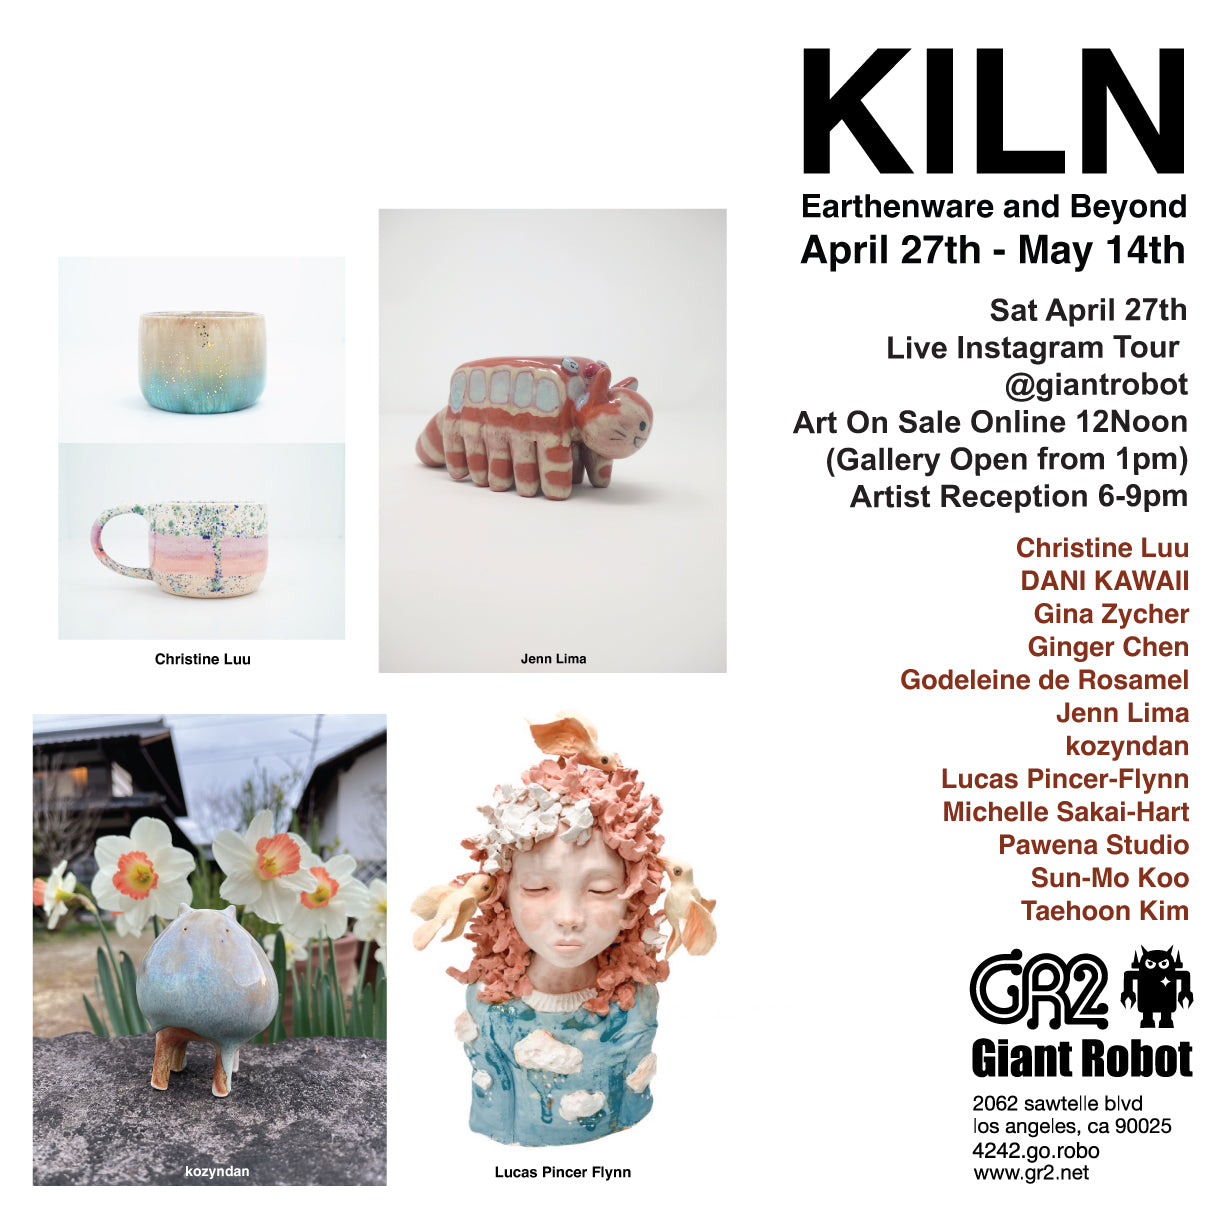 Flyer for a group art show, KILN. Names of artists are listed, times/dates and 4 accompanying photos of ceramic works.